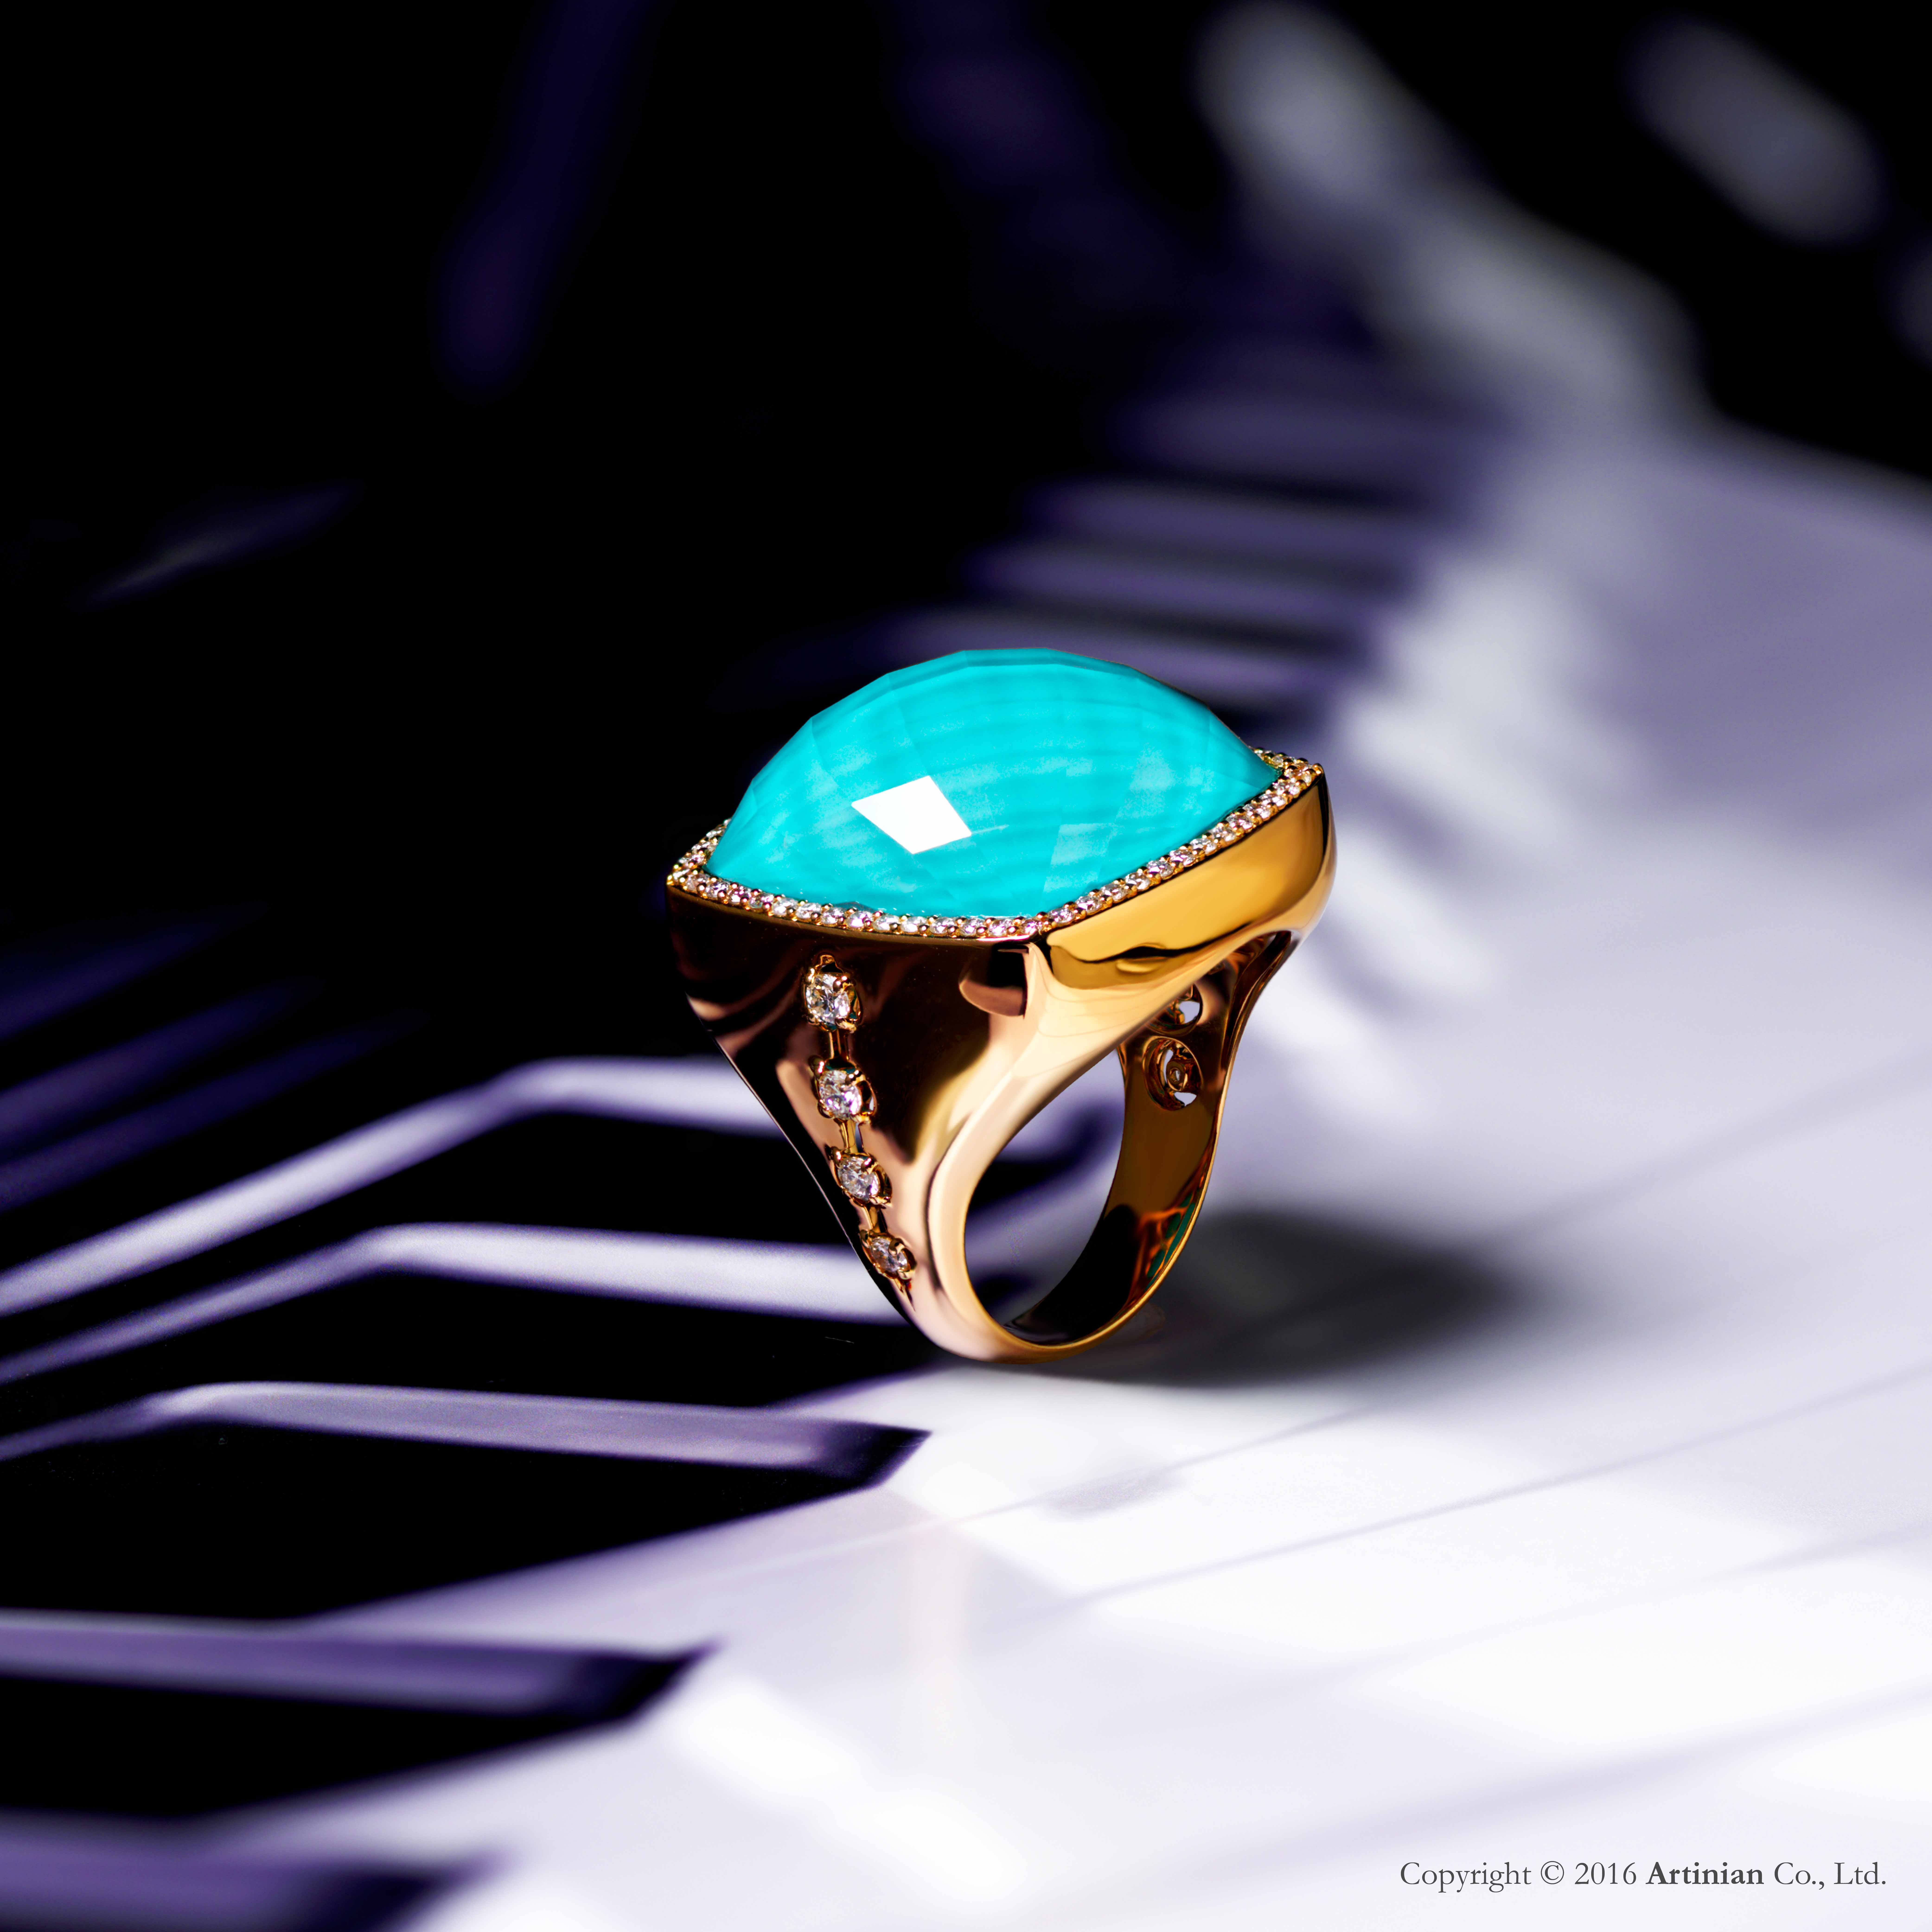 The pastels have indeed bloomed with the Artinian Fine Jewellery – Jazz Collection